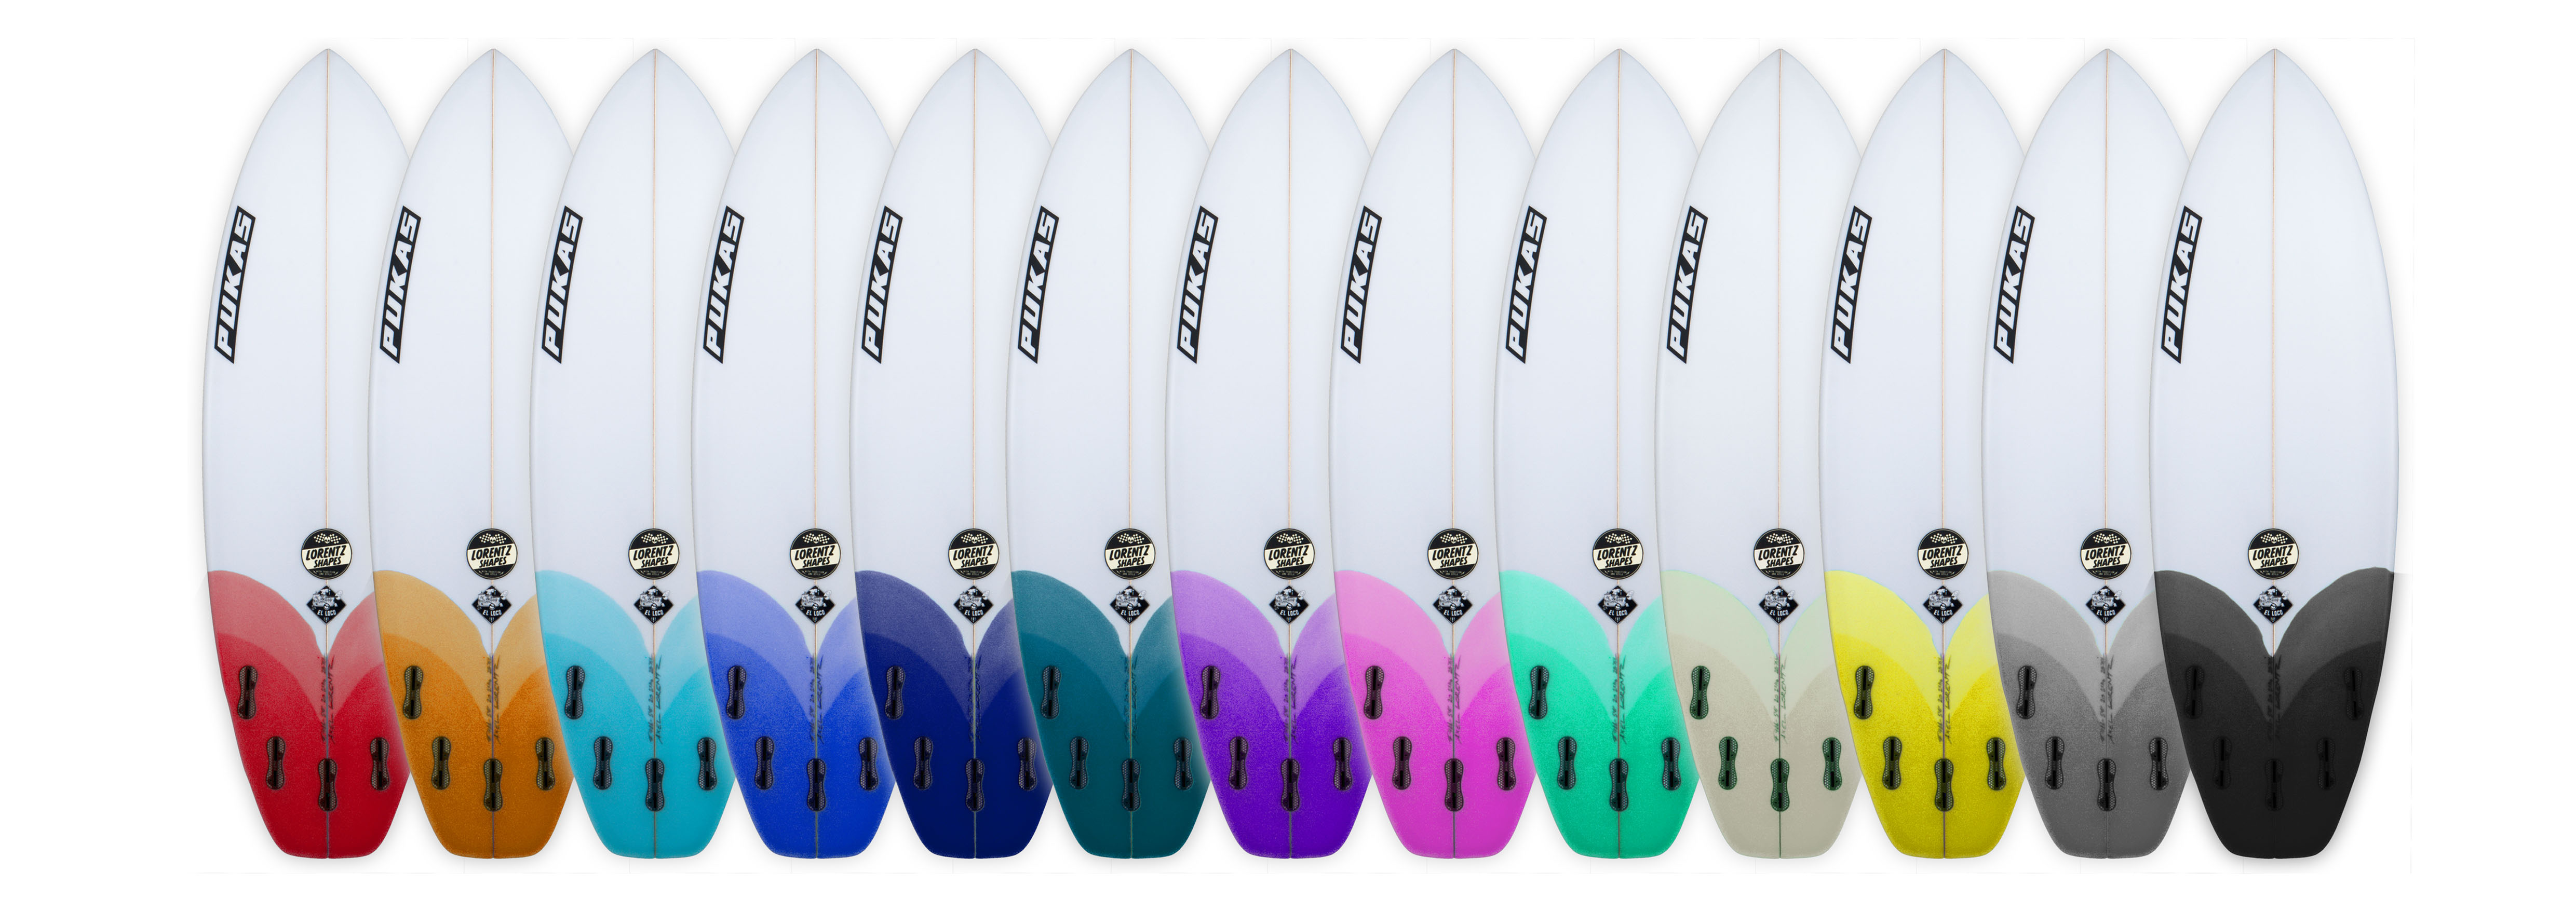 Pukas Surf Surfboards El Loco shaped by Axel Lorentz Tints Family